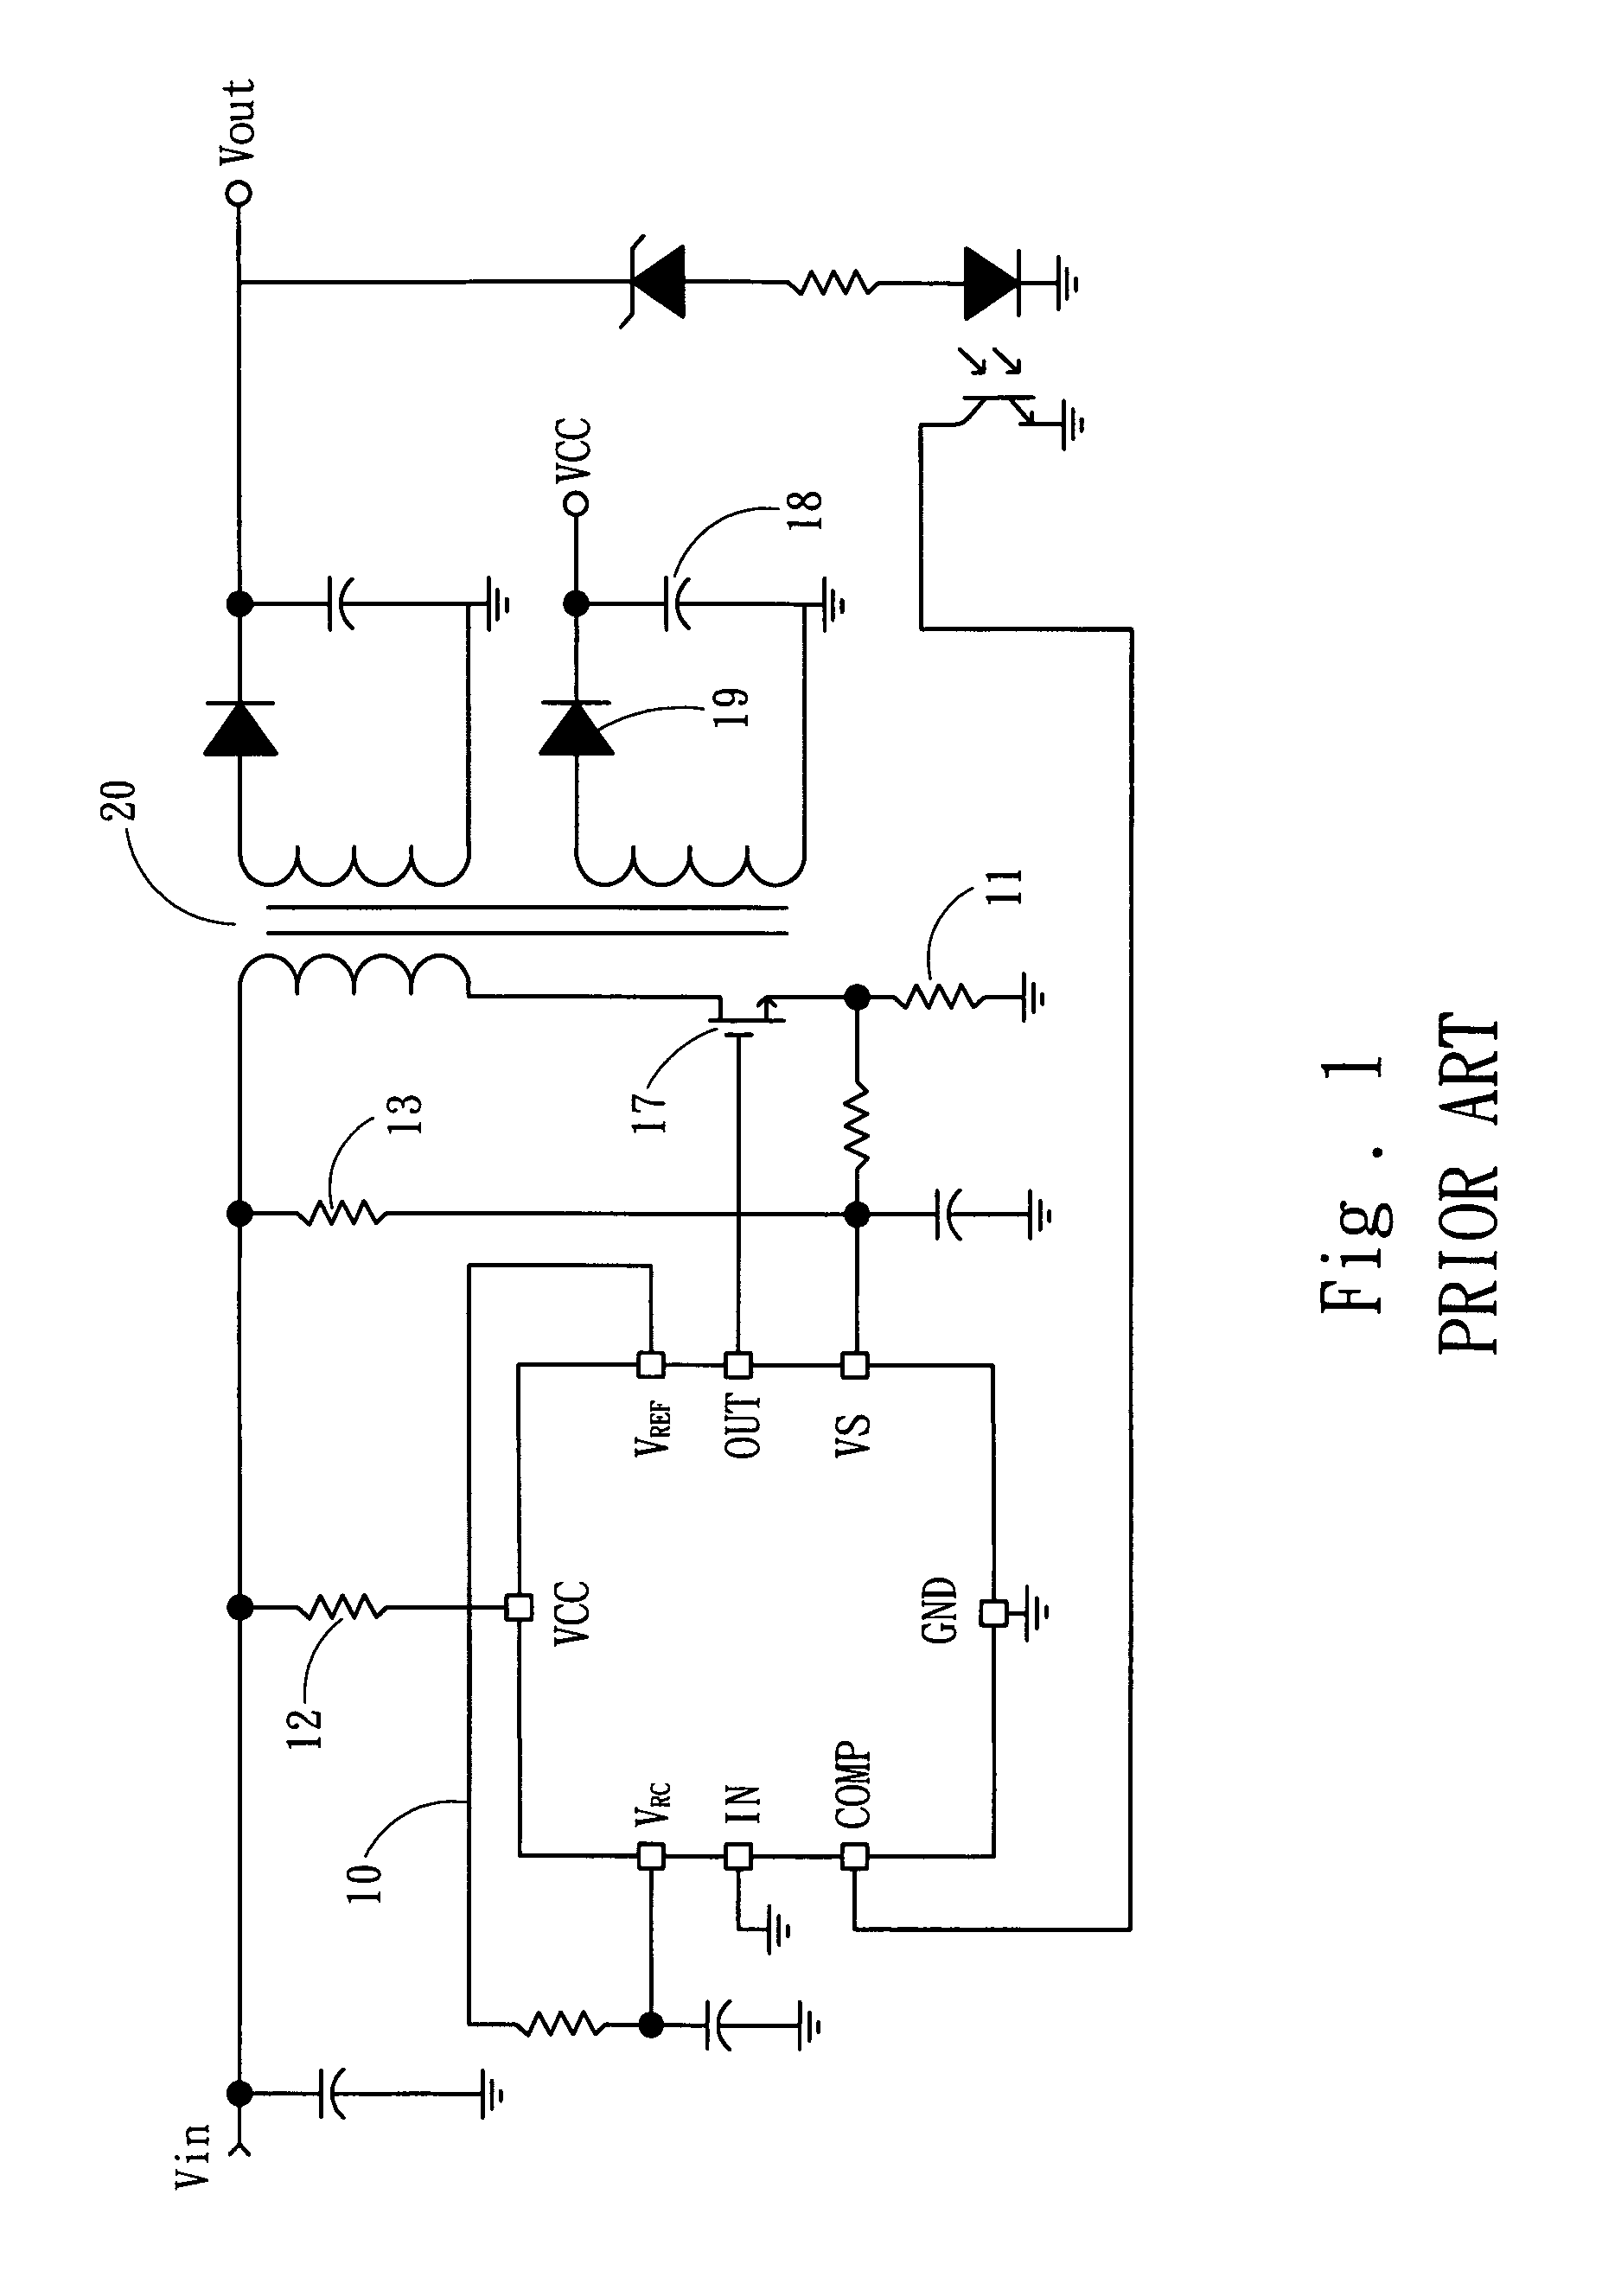 PWM controller with constant output power limit for a power supply